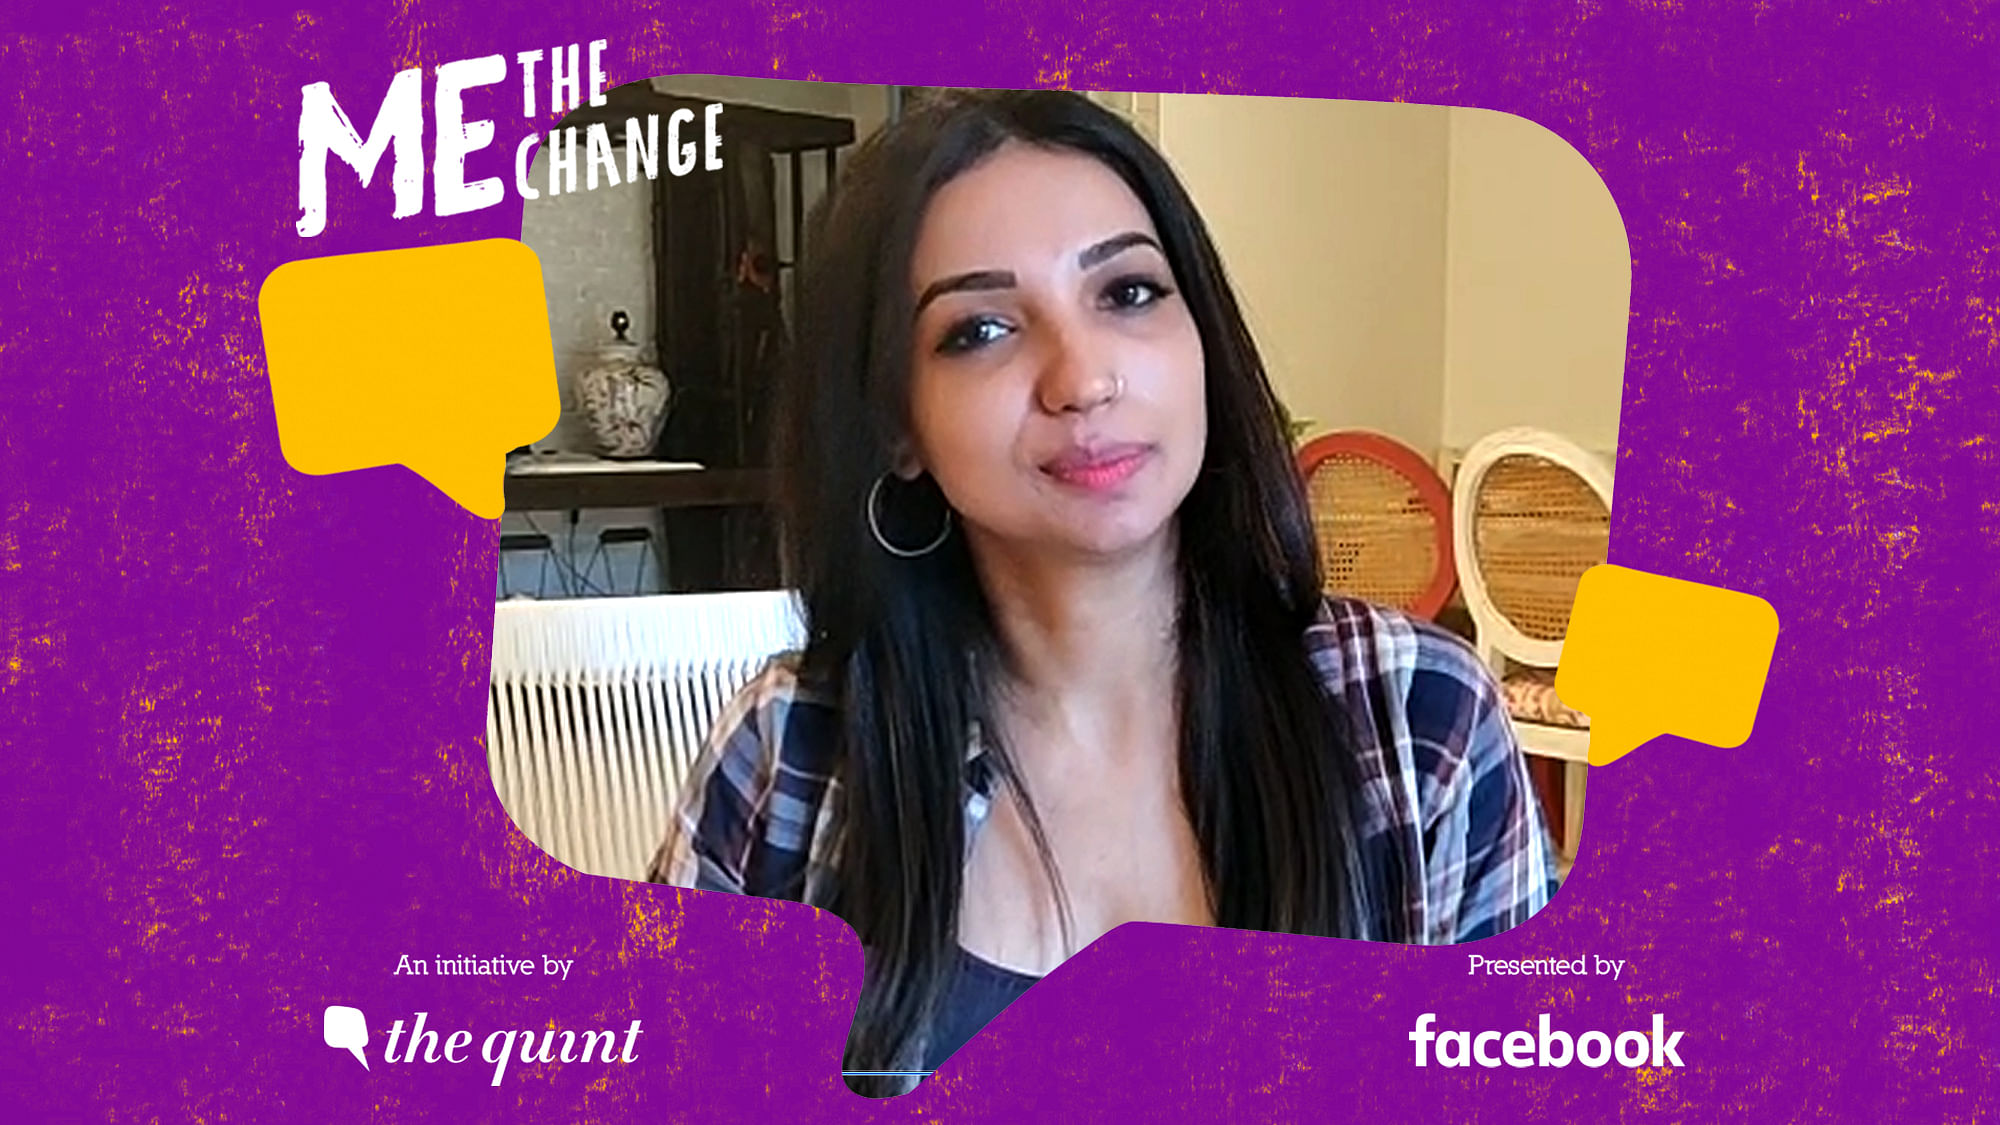 Author and screenwriter Kanika Dhillon speaks on The Quint’s “Me, the Change” campaign.